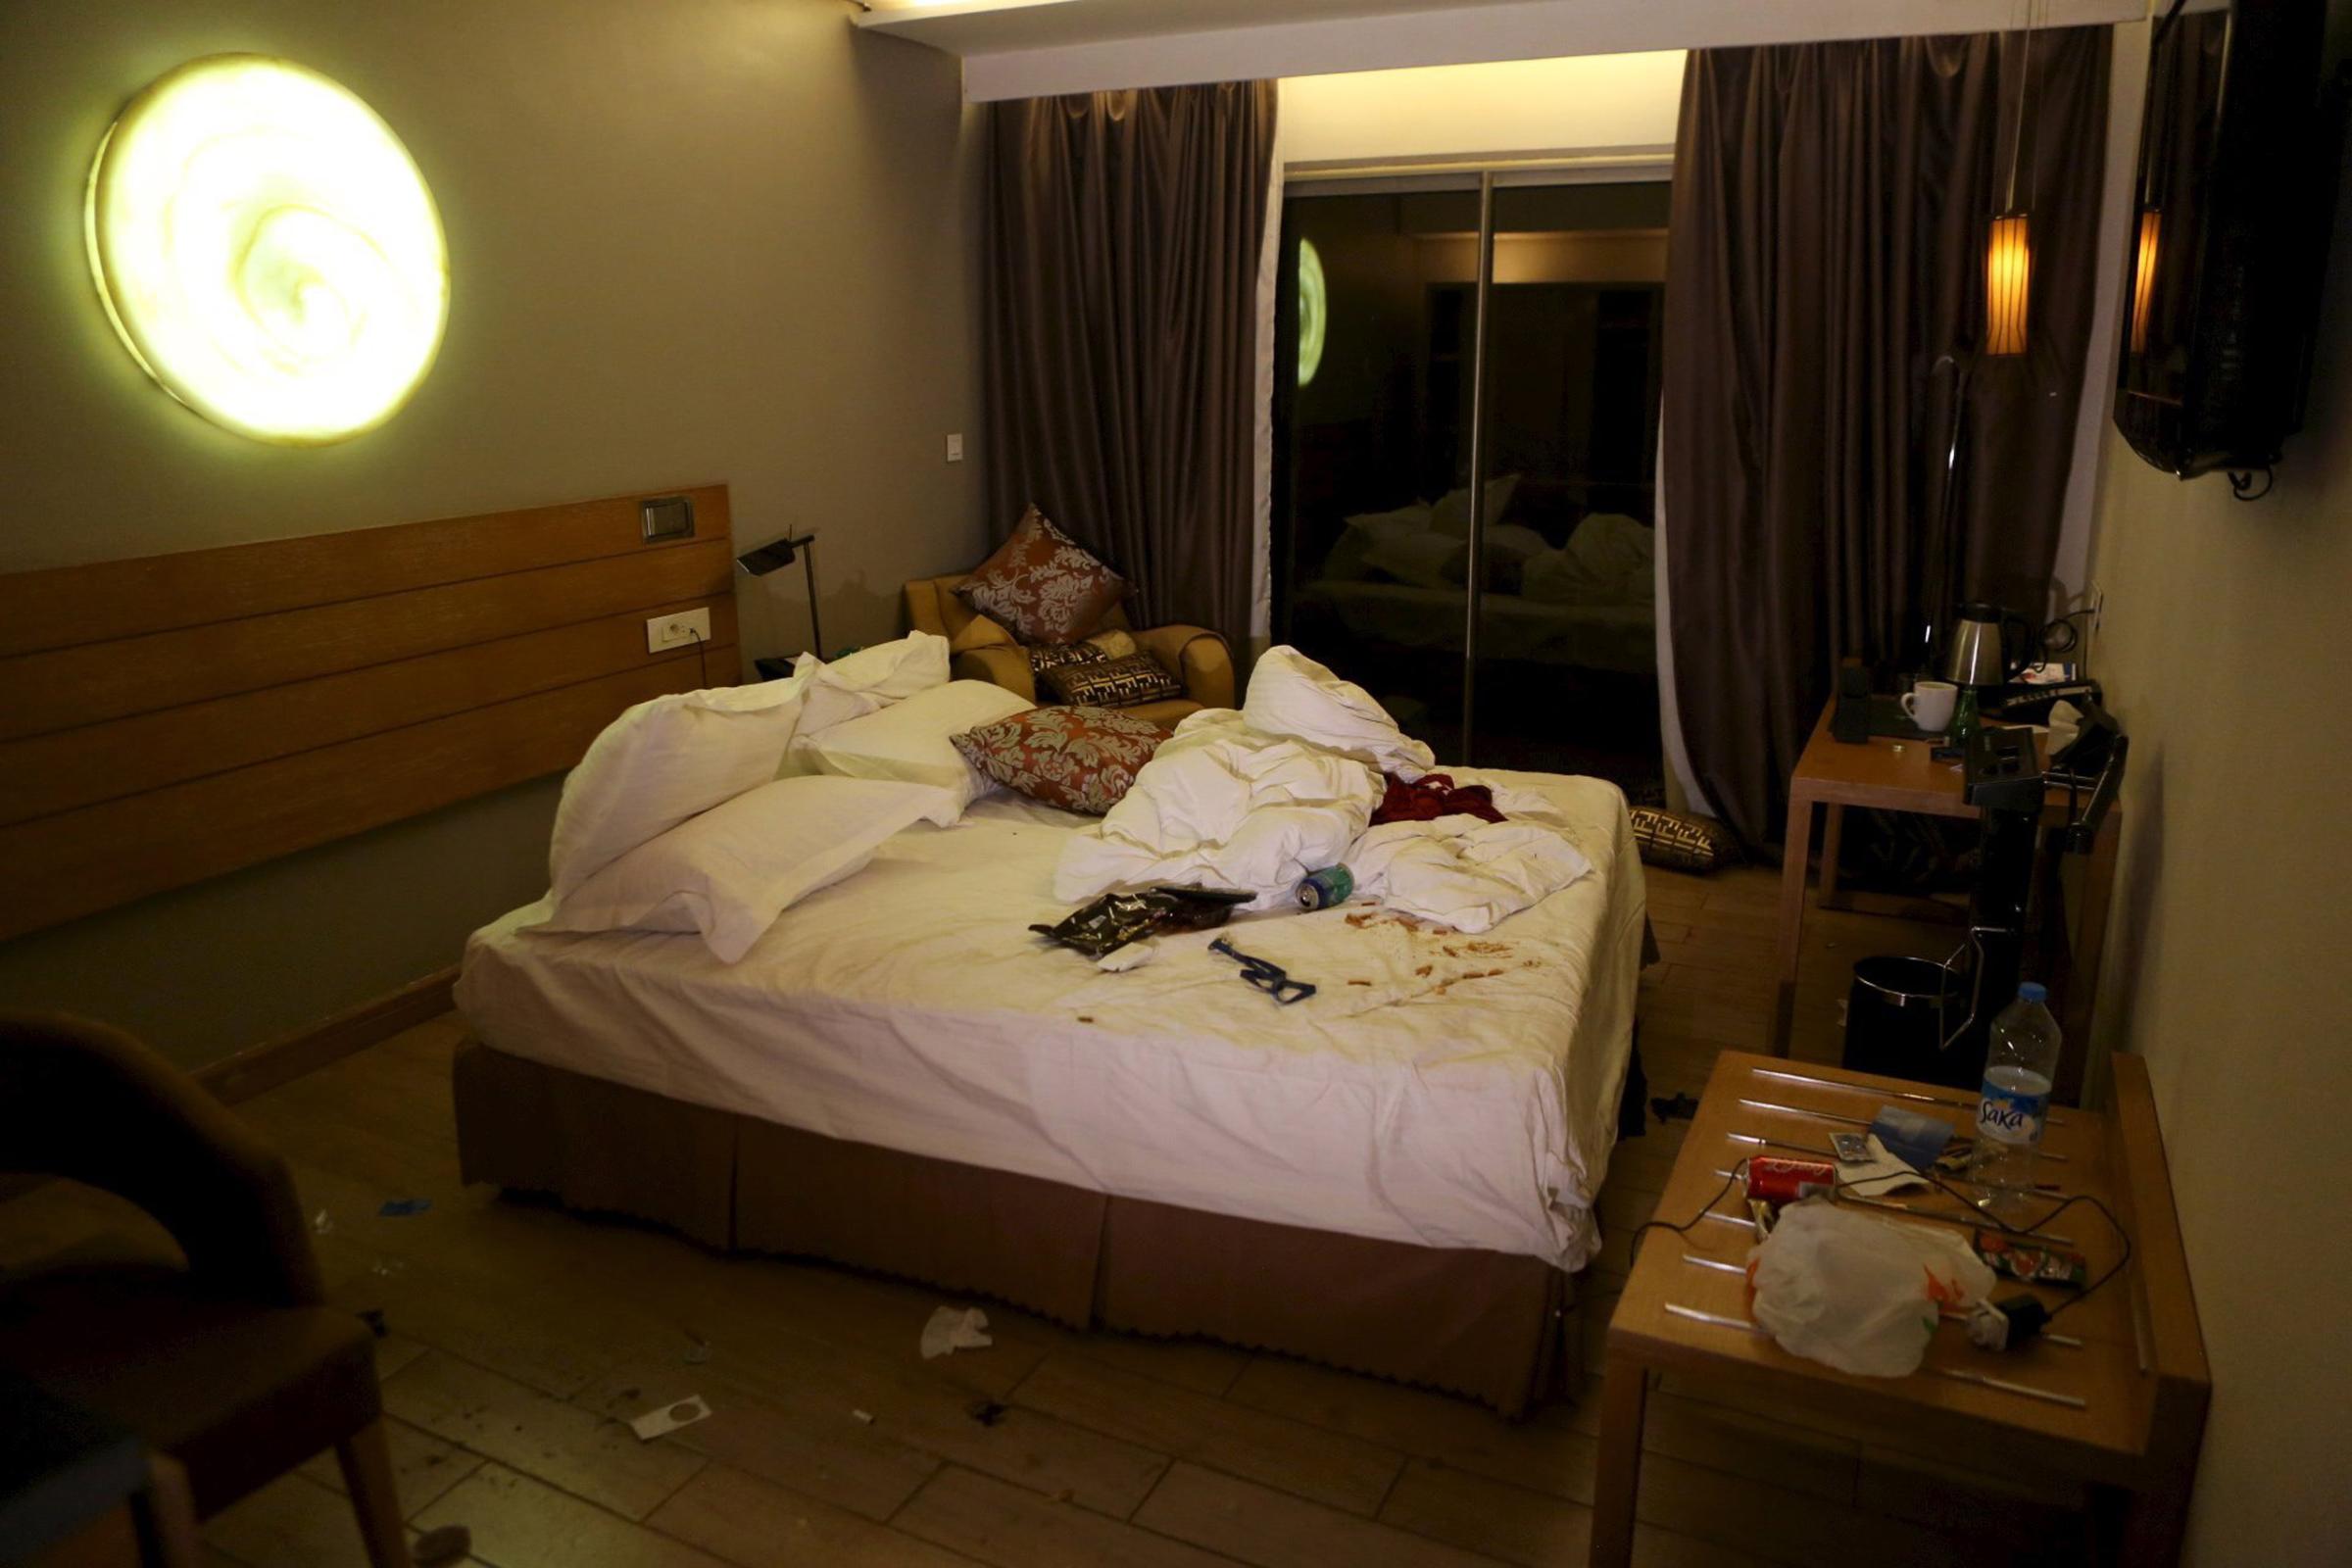 A room is seen in the Radisson hotel in Bamako